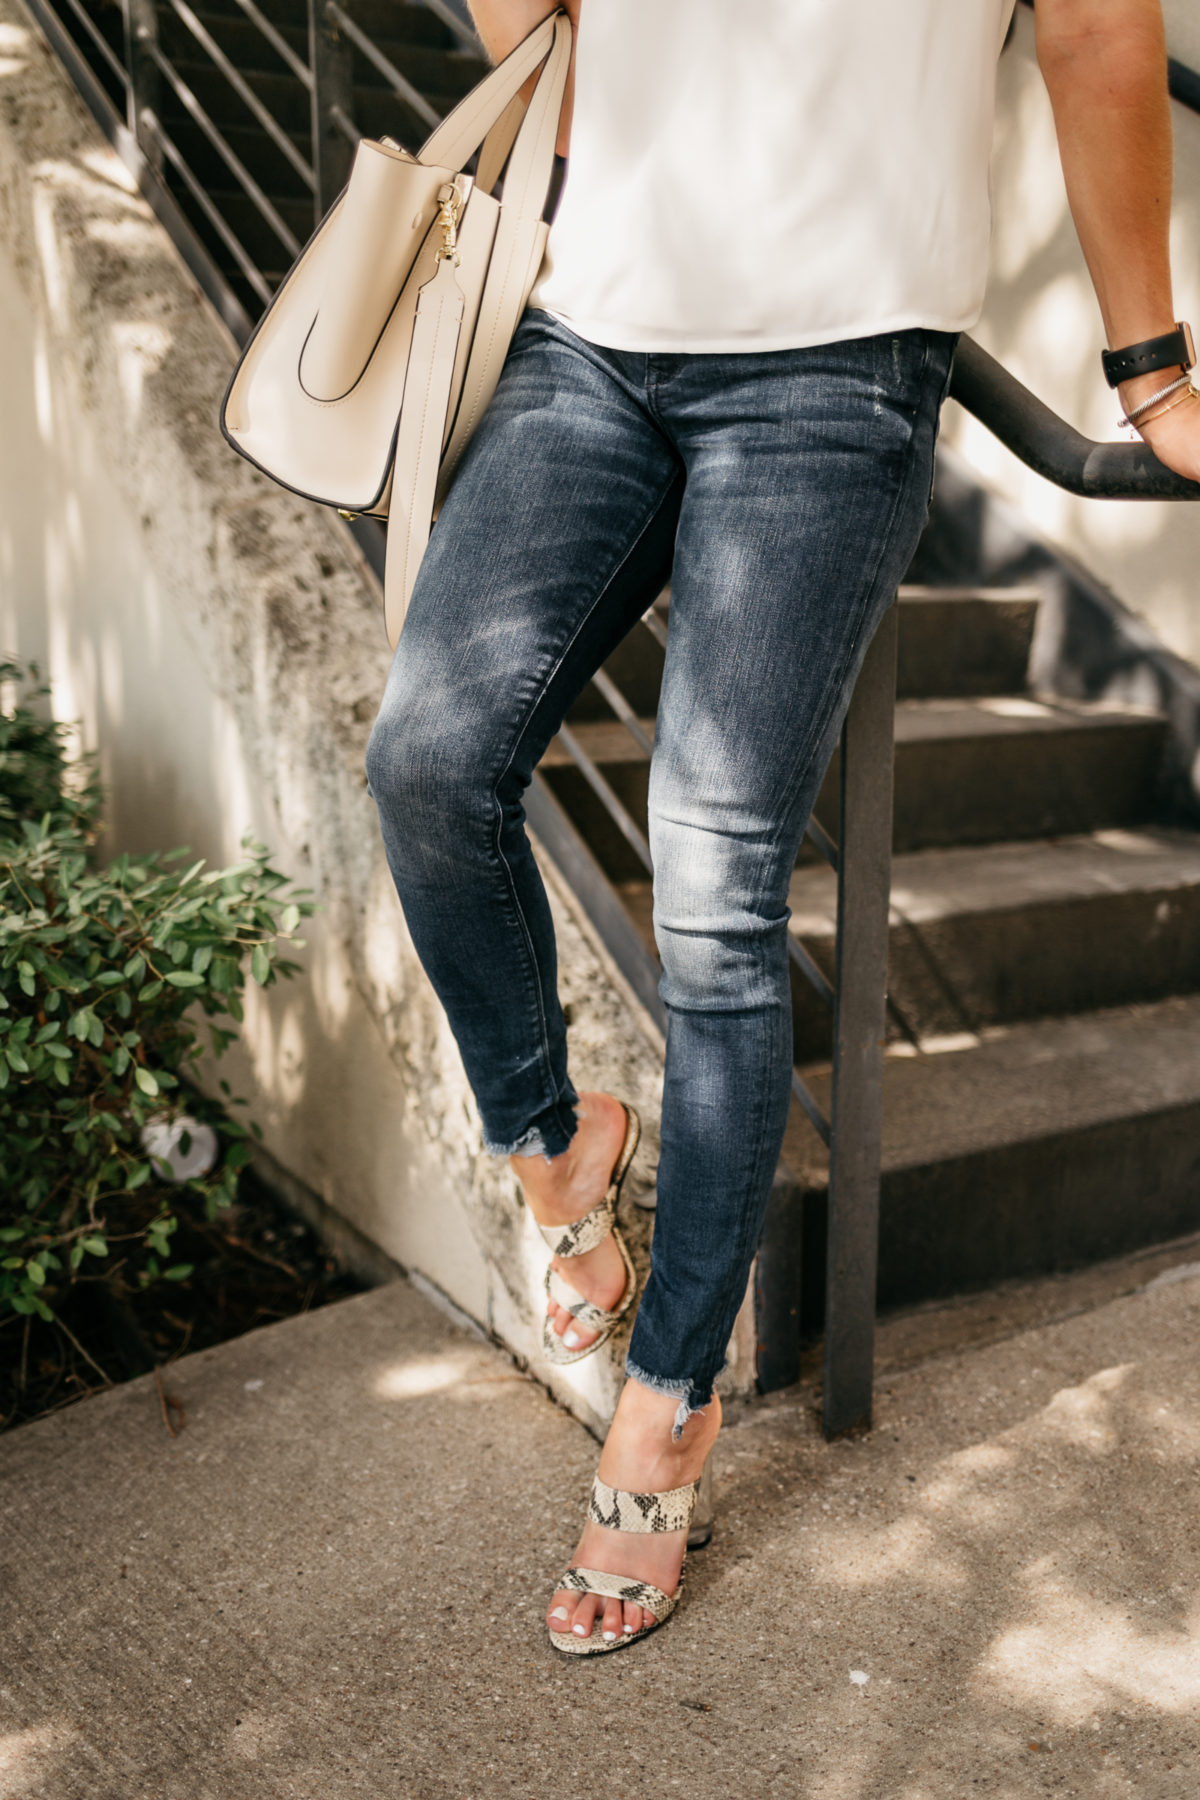 jeans, a blouse, and purse